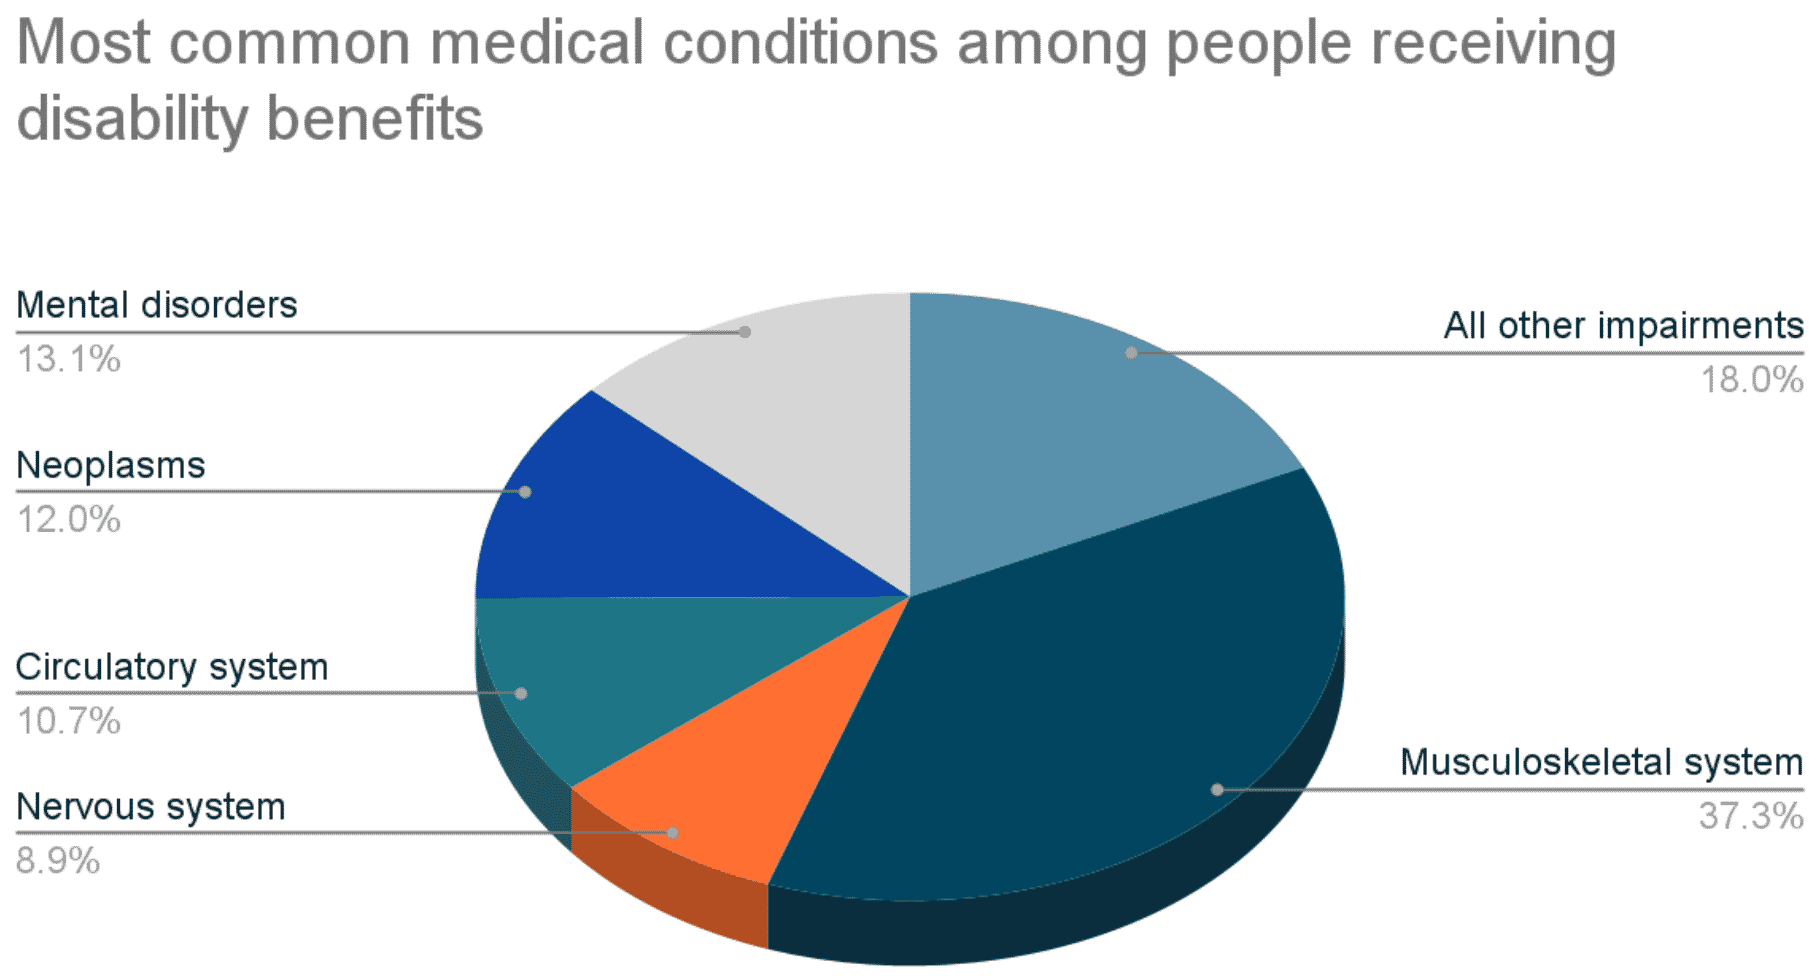 Most common medical conditions among people receiving disability benefits